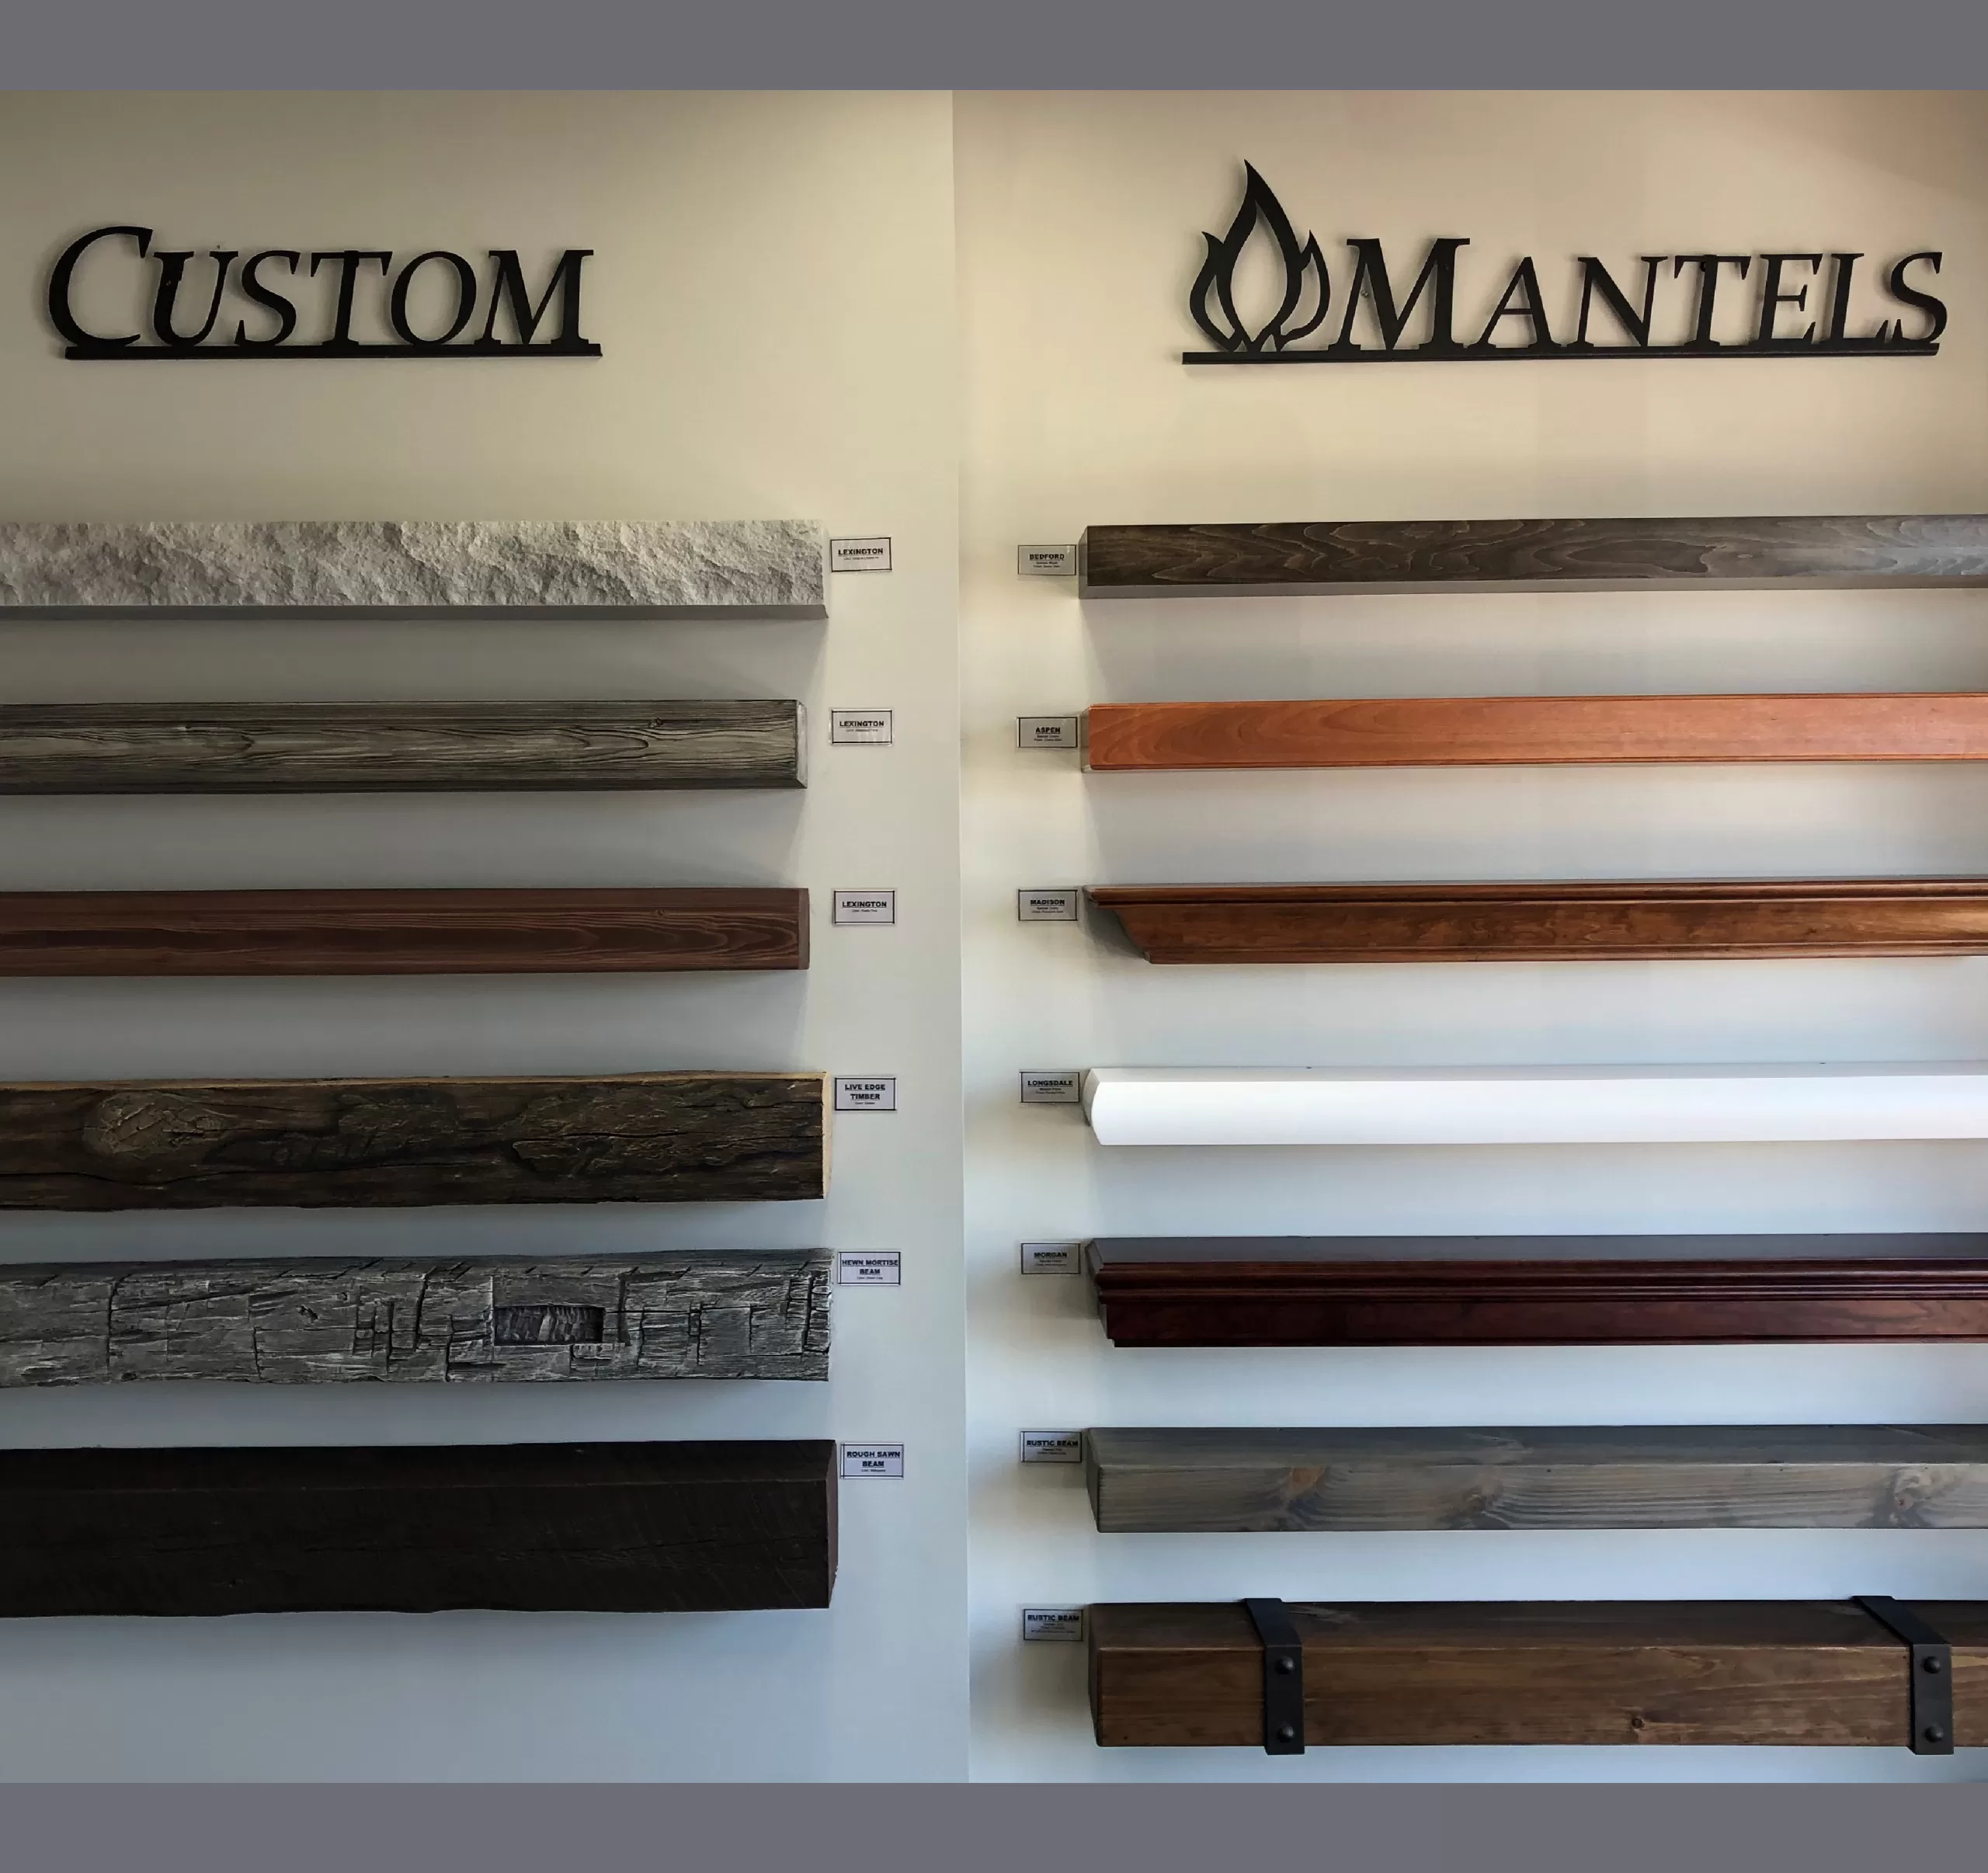 Hearth & Home Custom Mantels by Stoll Industries, Premier Mantels, and Ambiance